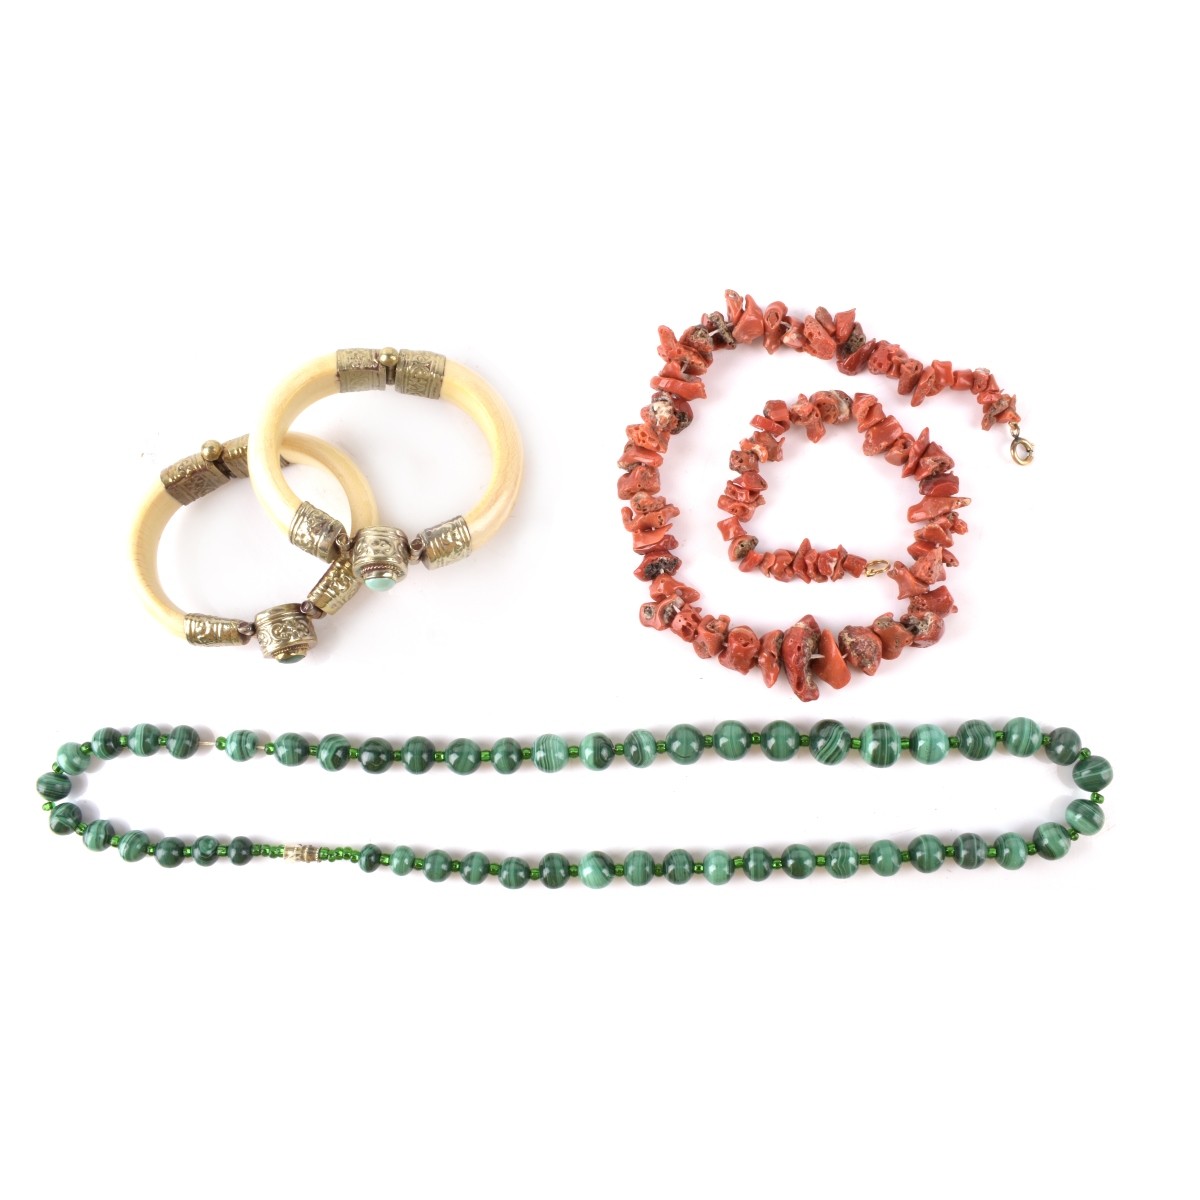 Malachite and Coral Necklaces